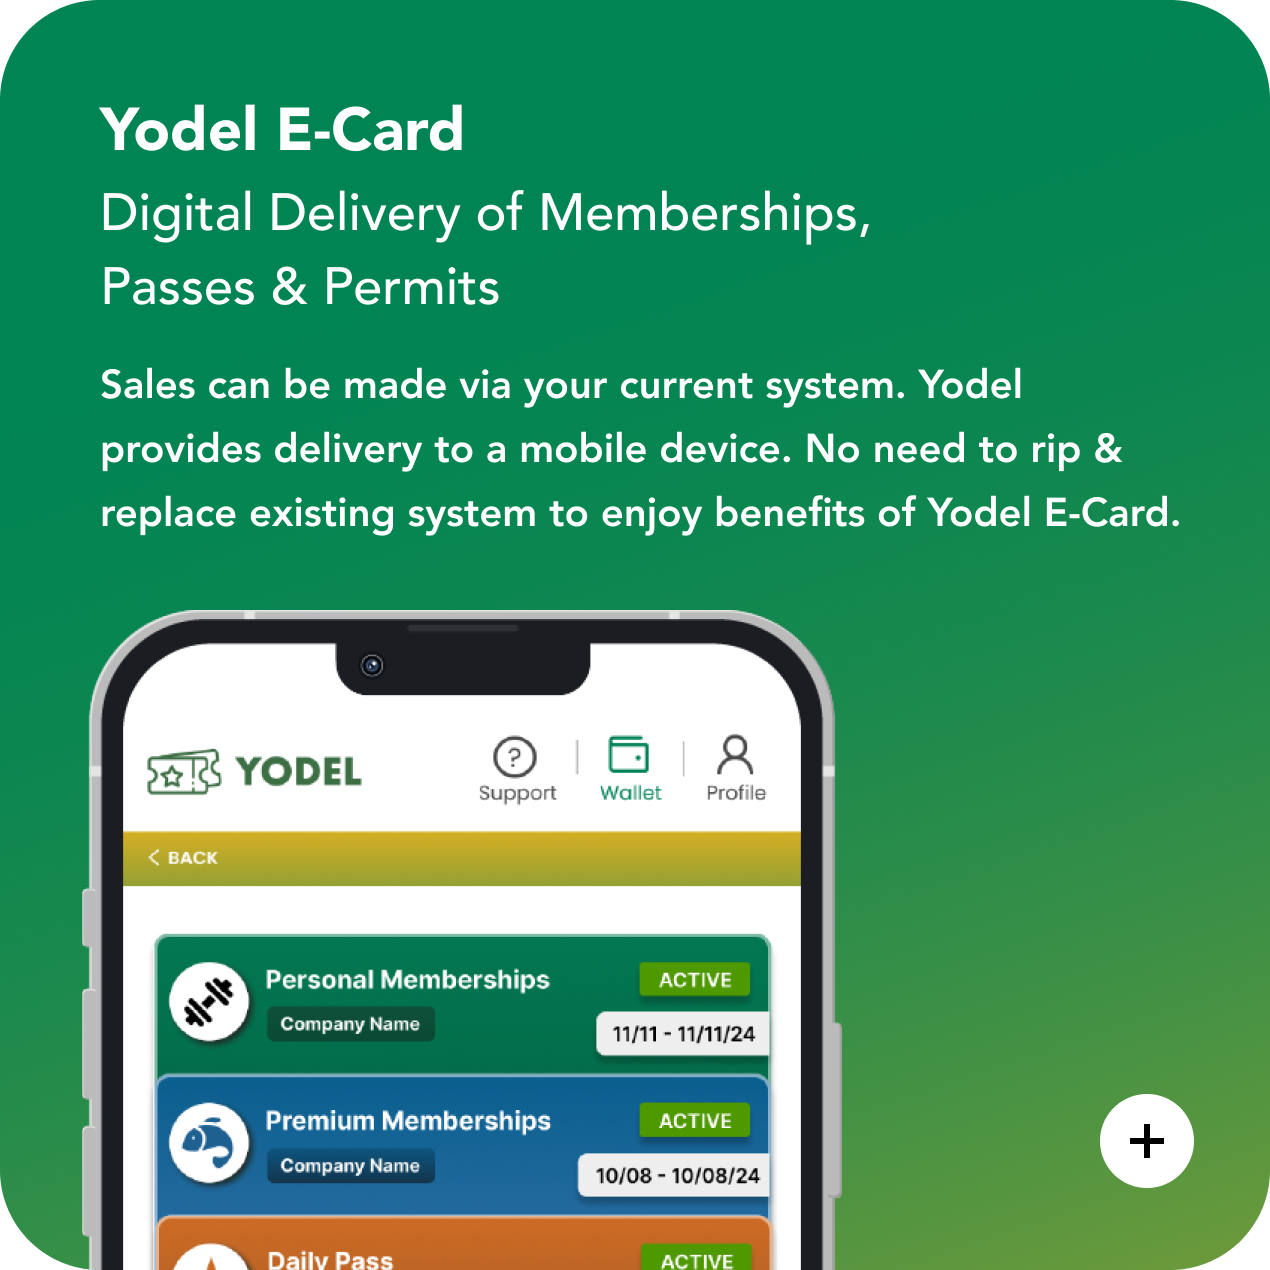 Yodel E-Card: Digital delivery of memberships, passes & permits.